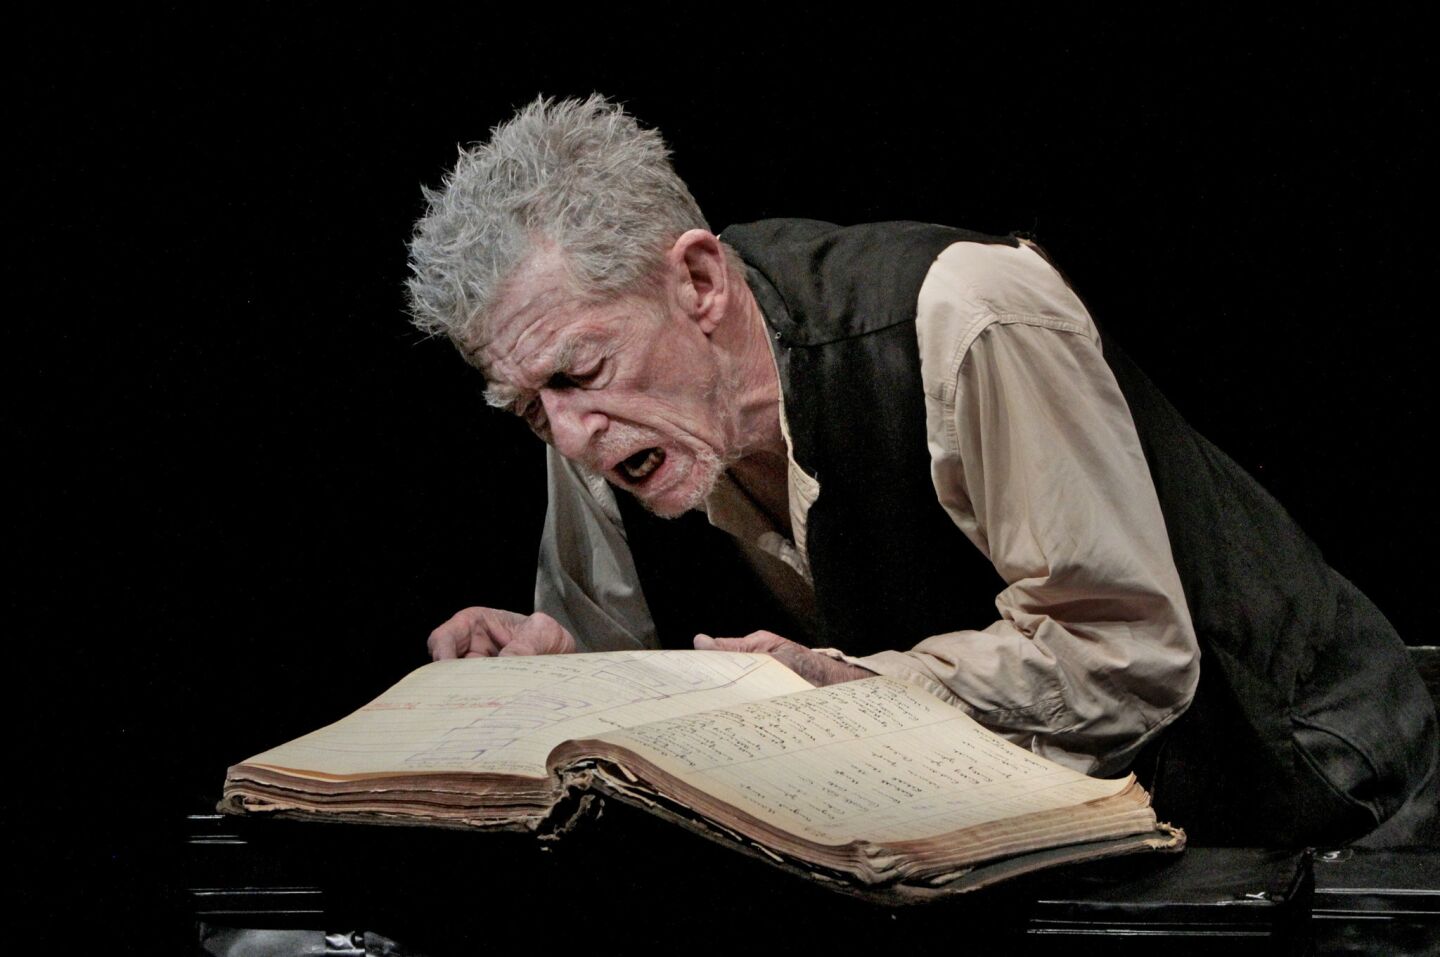 Two-time Oscar nominee John Hurt performs "Krapp's Last Tape" by Samuel Beckett at the Kirk Douglas Theatre in Culver City, Calif.More: John Hurt plays back 'interrupted pause' of 'Krapp's Last Tape' | Review